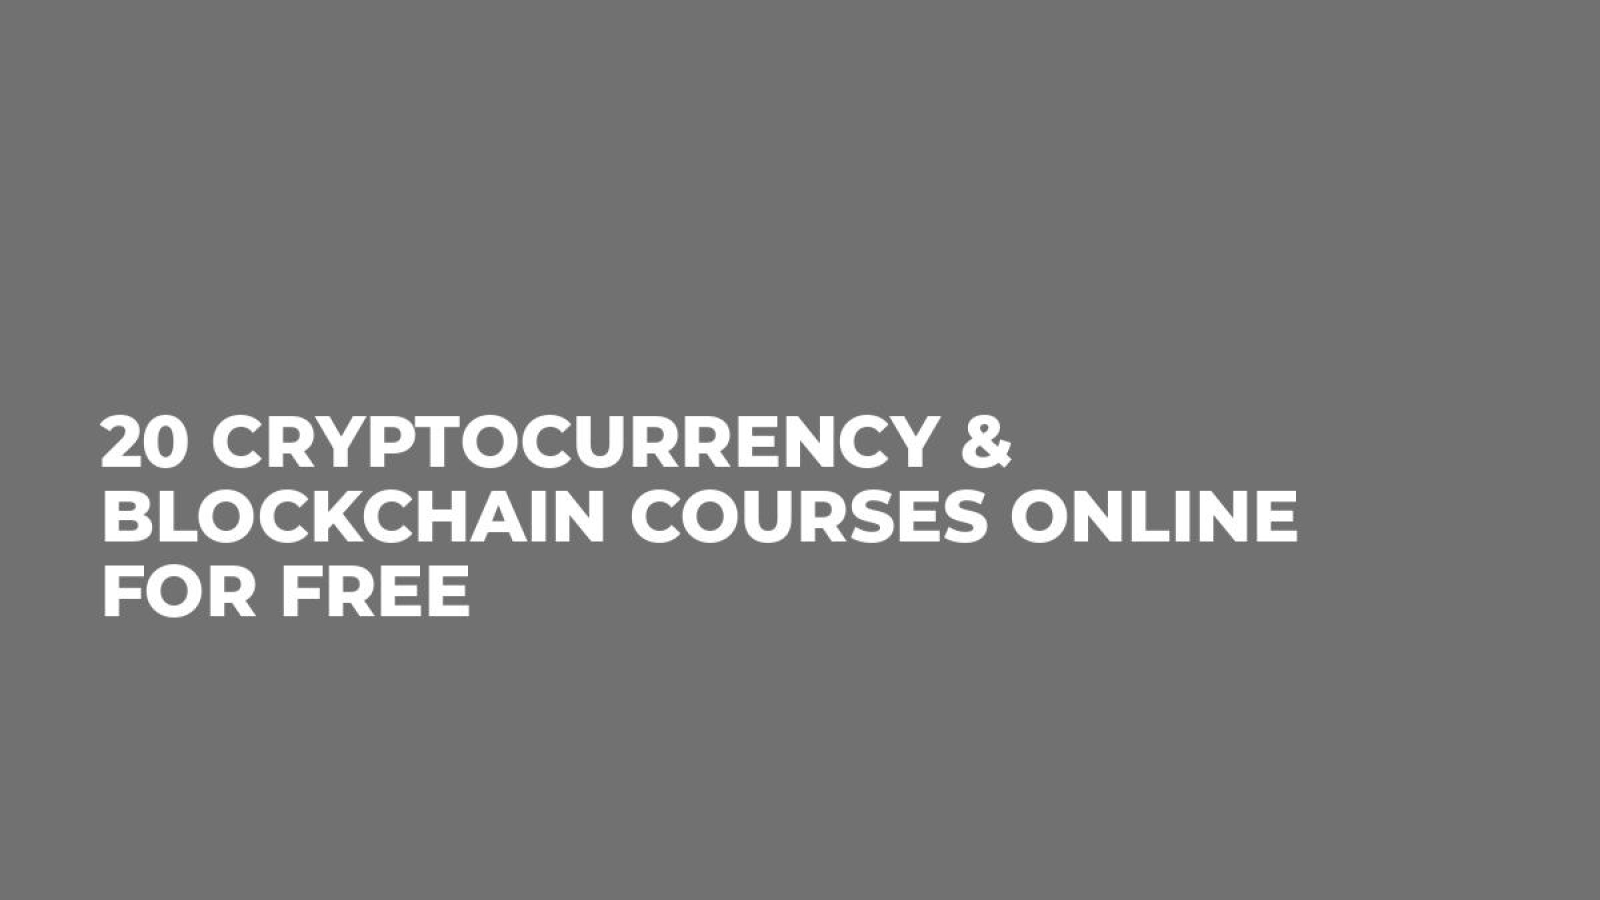 20 Cryptocurrency & Blockchain Courses Online for FREE